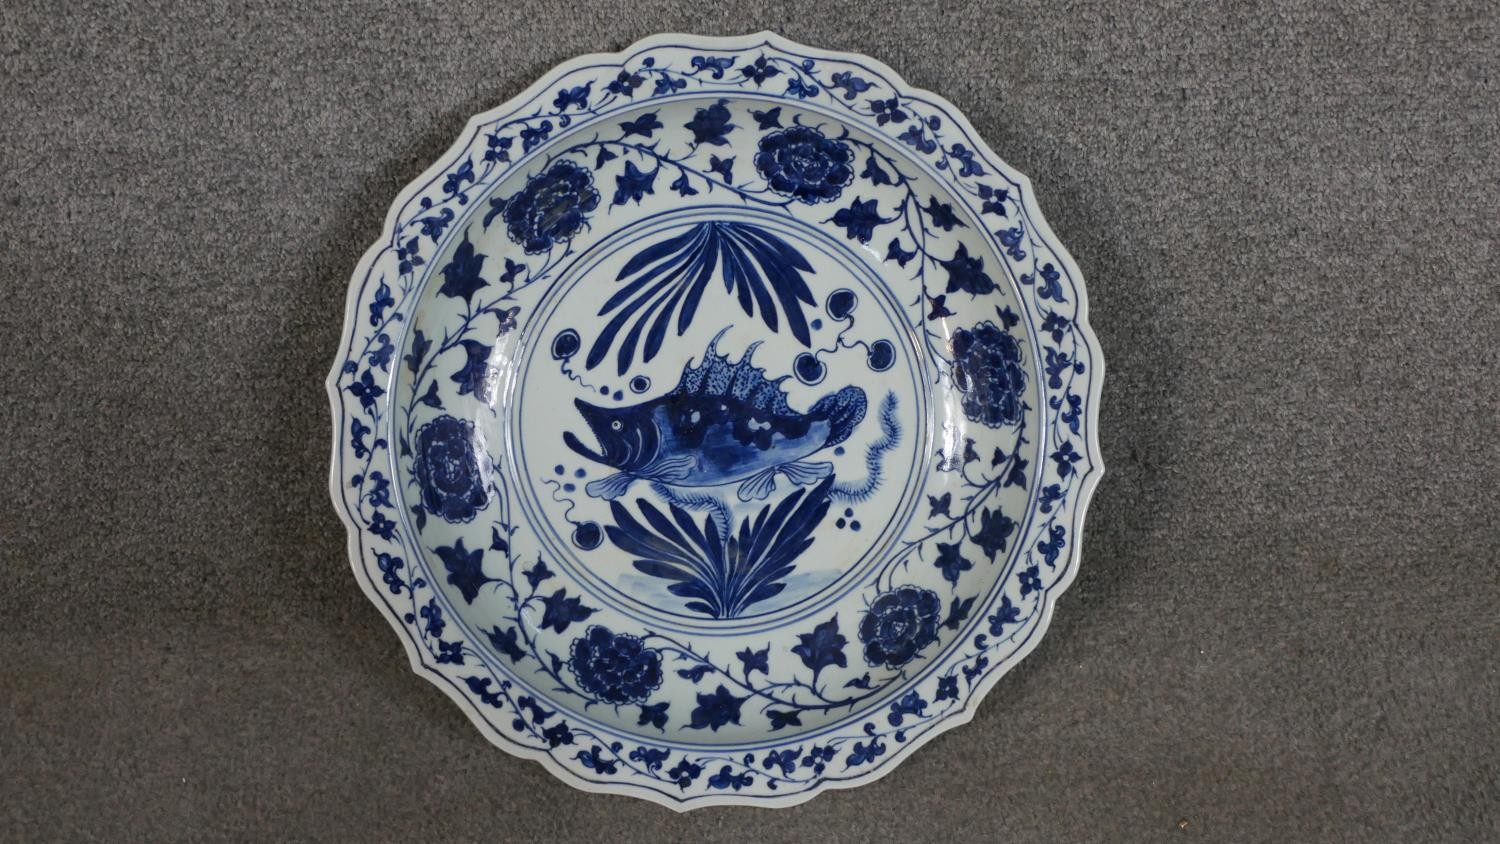 A large 19th century Chinese blue and white porcelain charger, painted with a central fish and